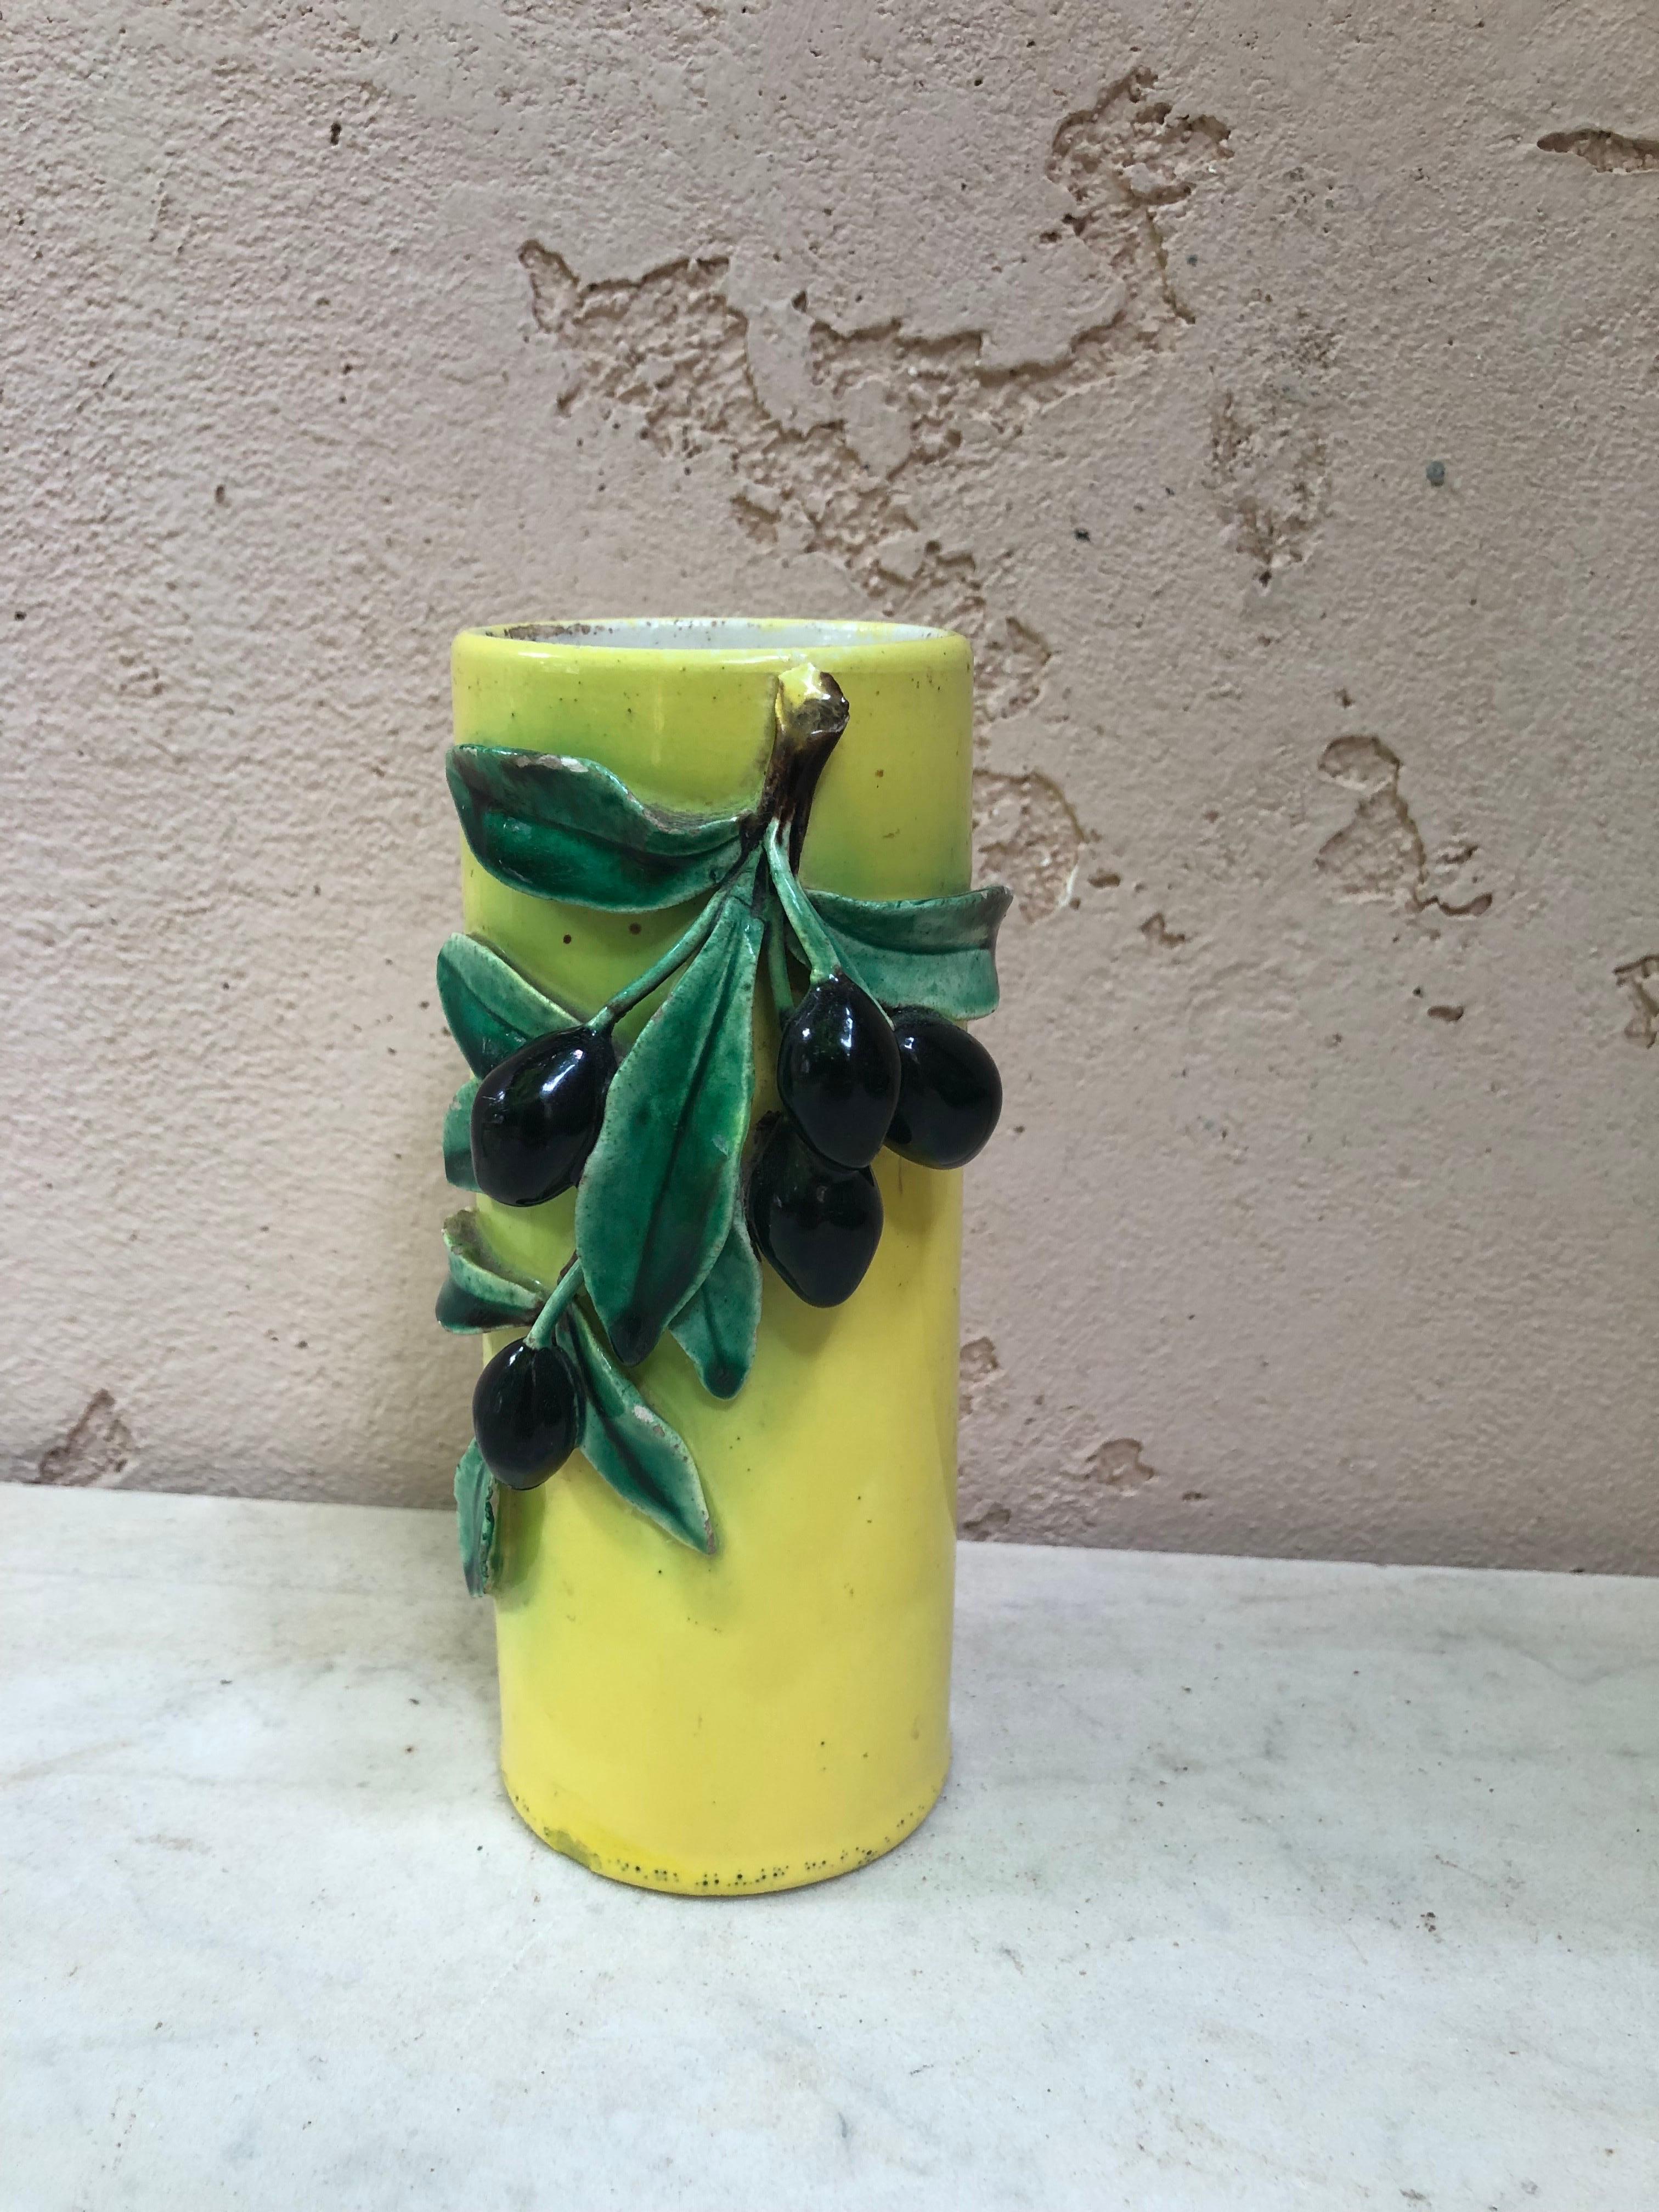 Rare 19th century Majolica vase With olives signed Perret Gentil Menton.